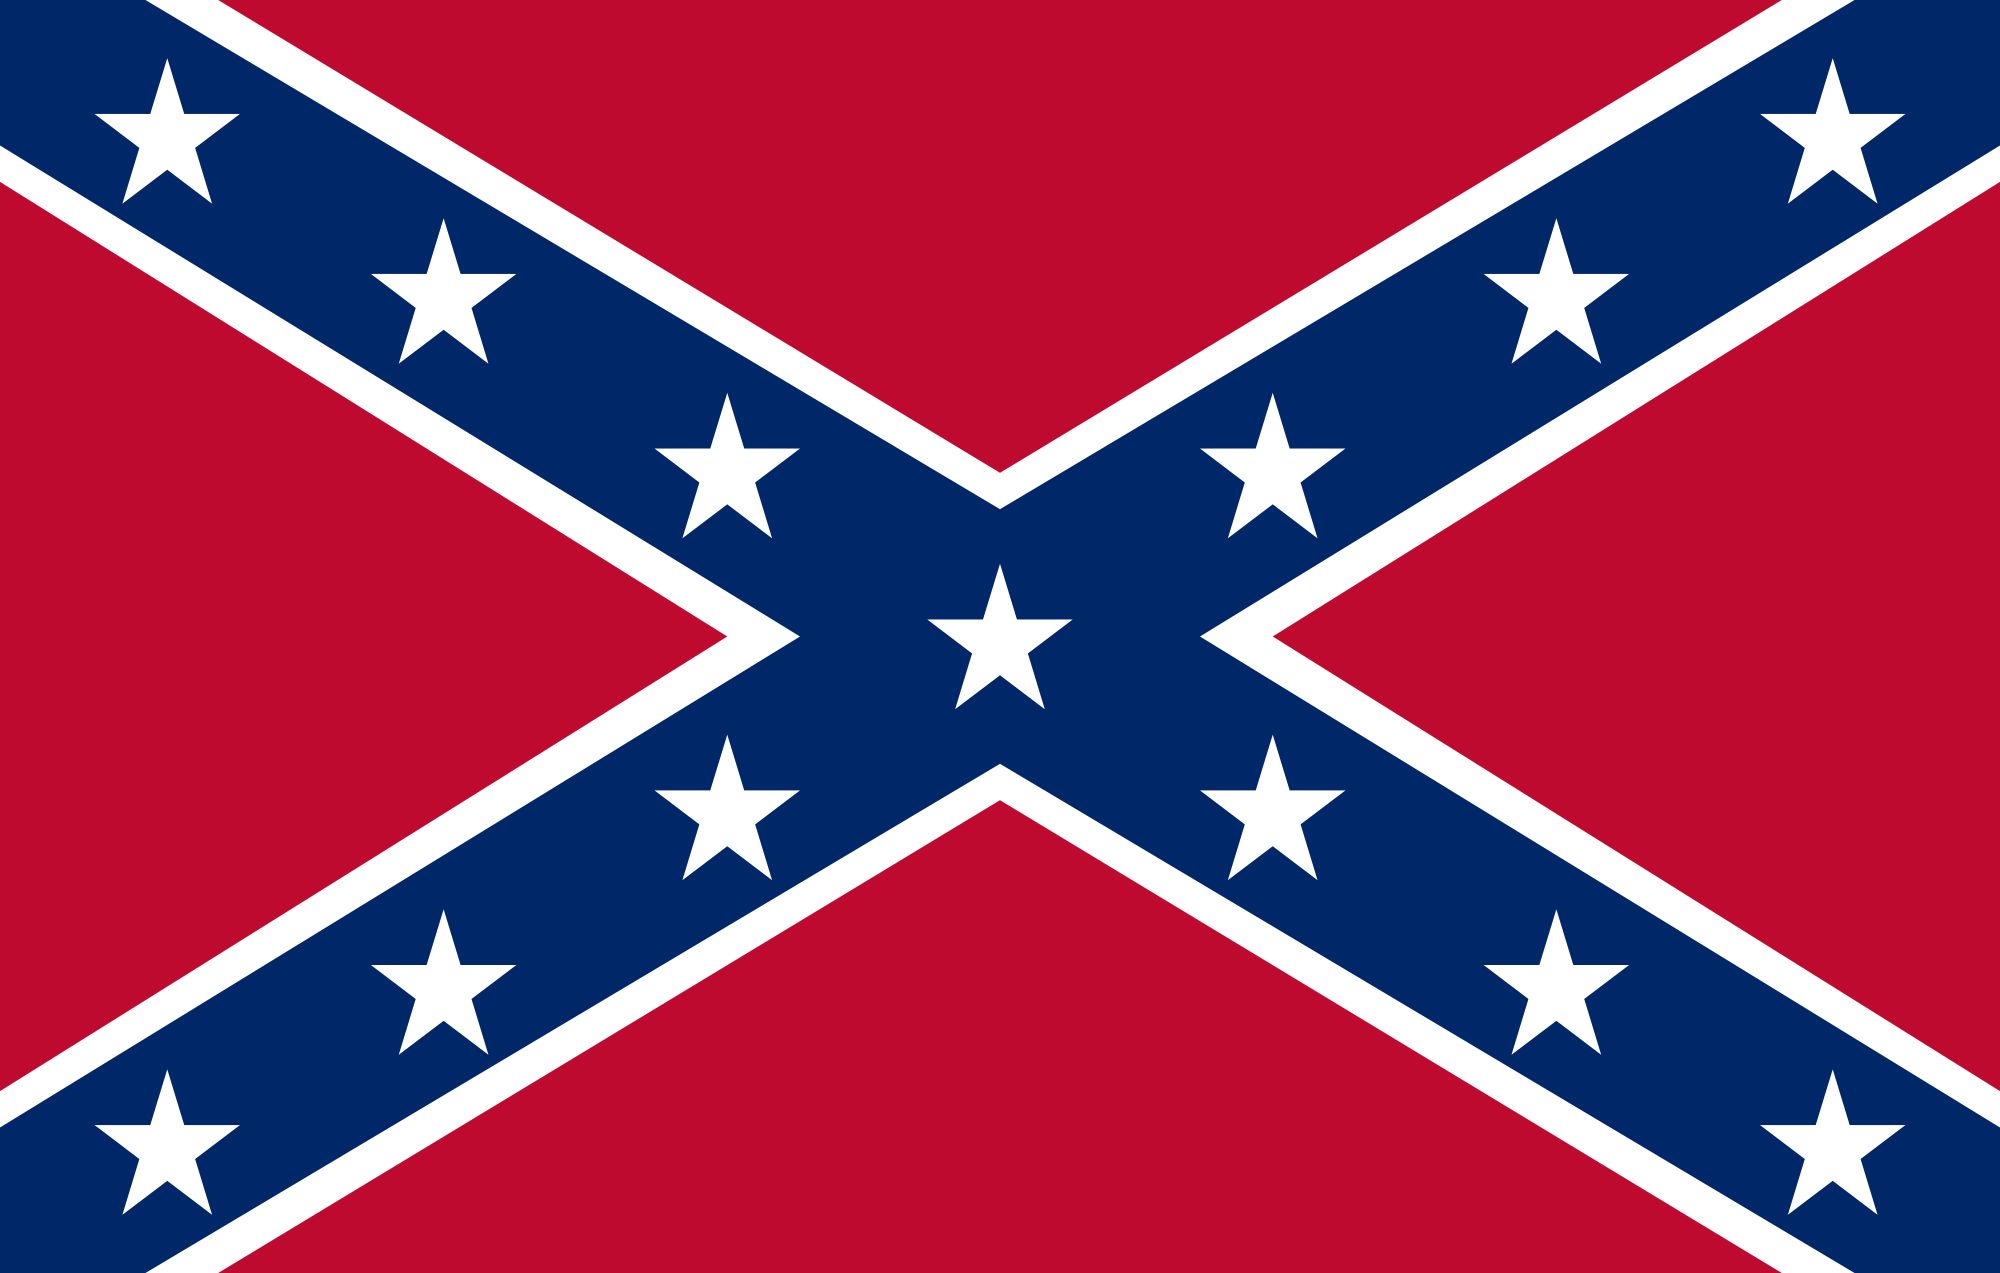 flag of the confederate states of america, misc, flags